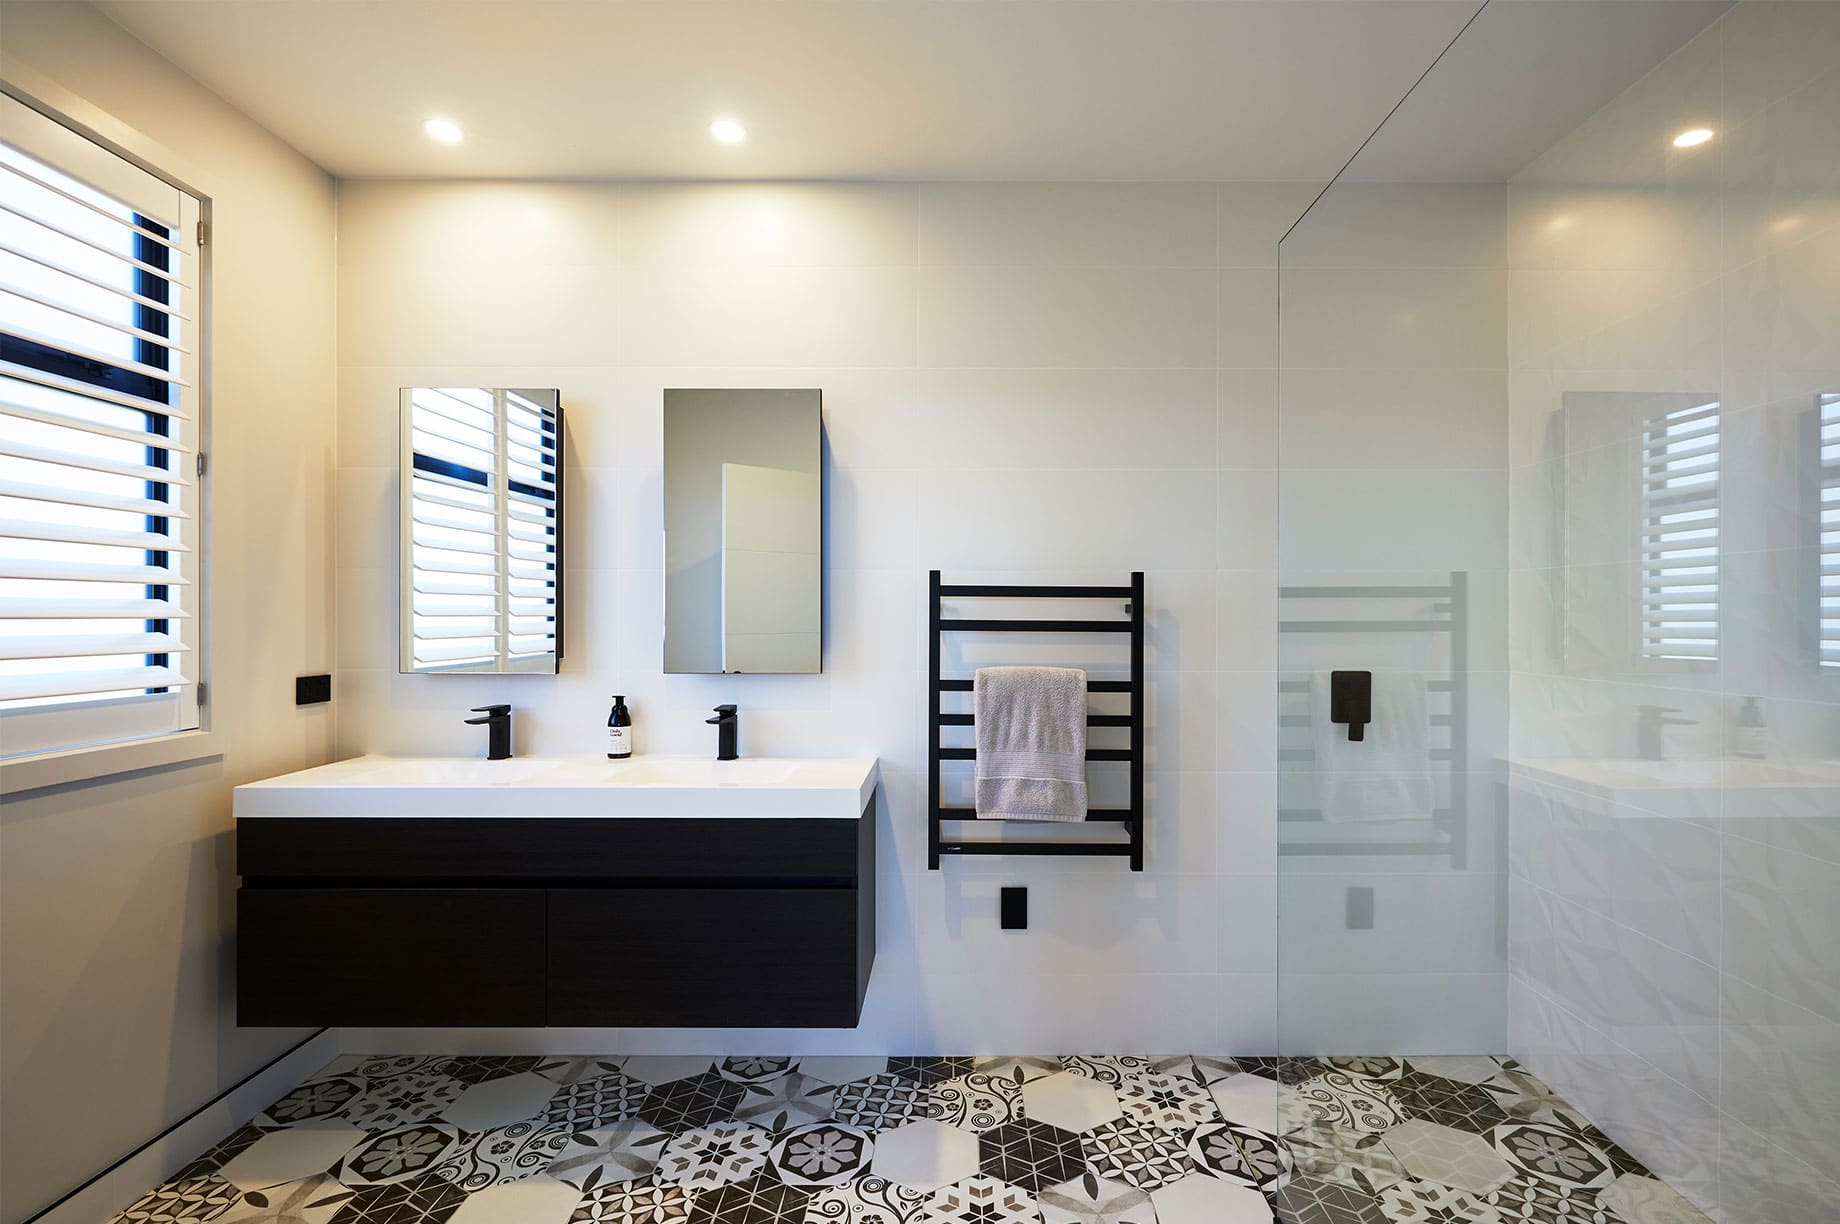 White and black bathroom interior with the lights on